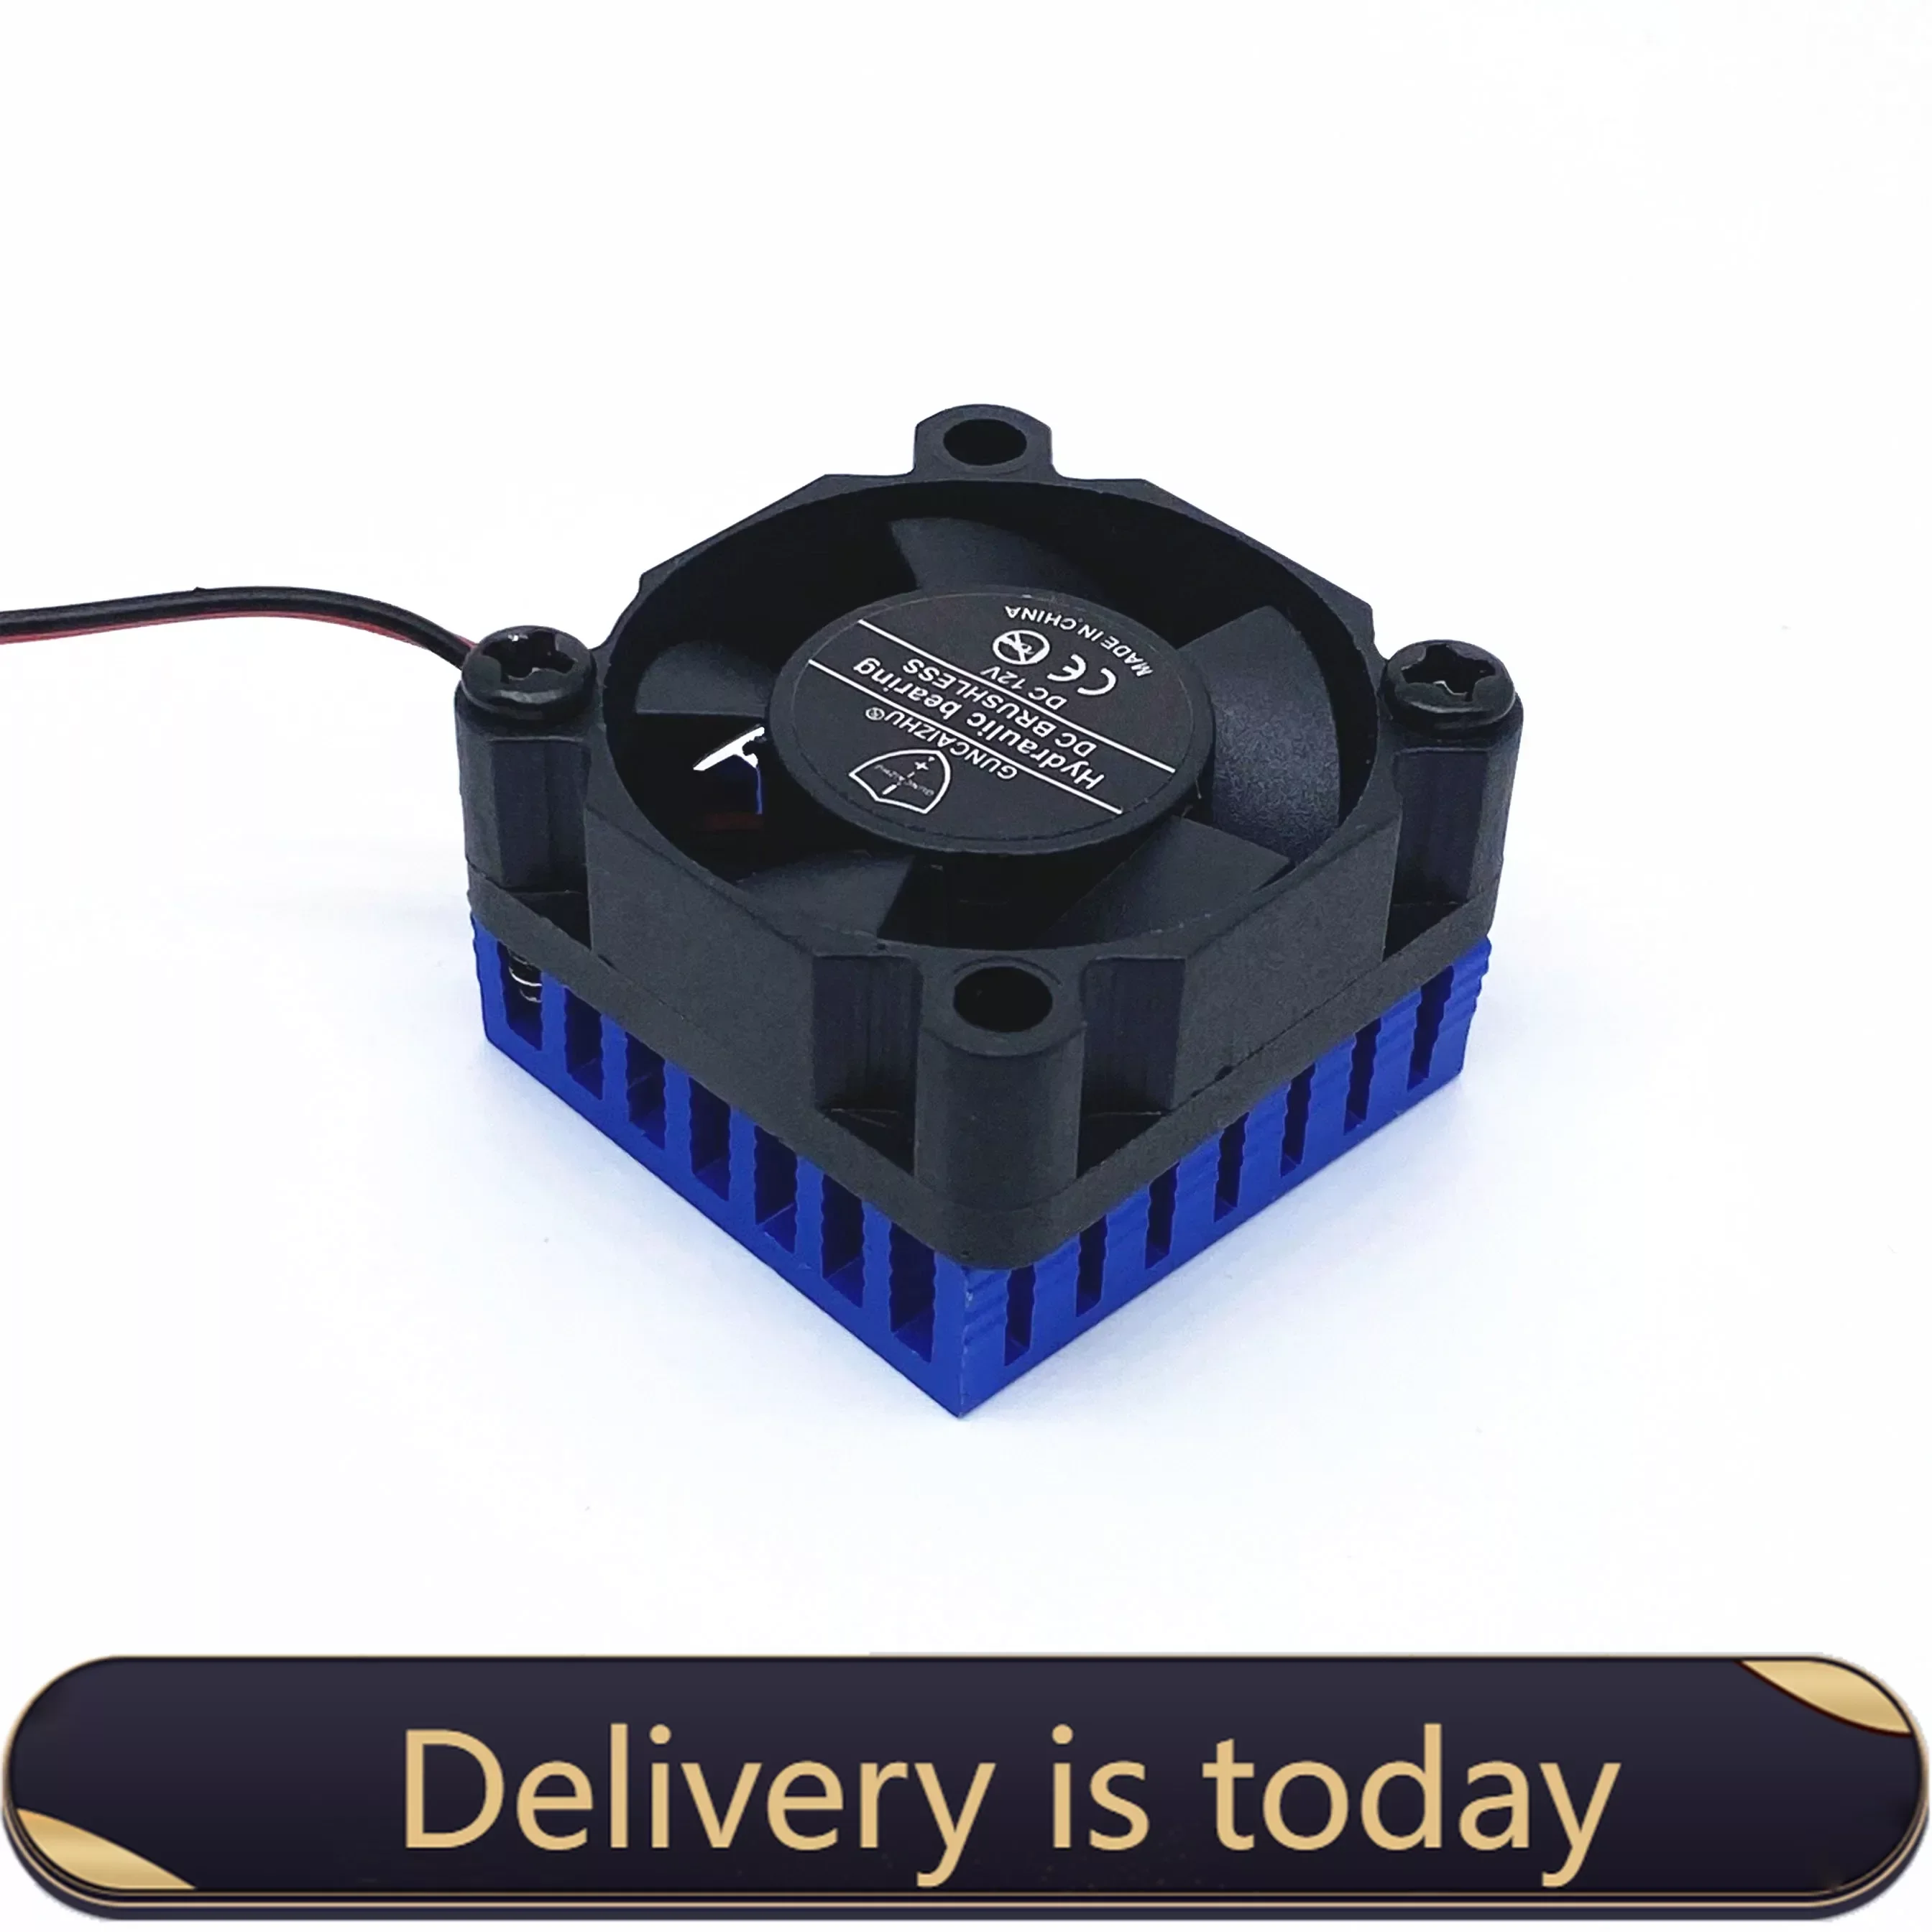 DC 5V 12V 24V 30x30x18mm 3010 30MM Fan With 8mm Heat Sink BGA Fan Graphics Card Fan With Heat Sink Cooler Cooling Fan 2Wire